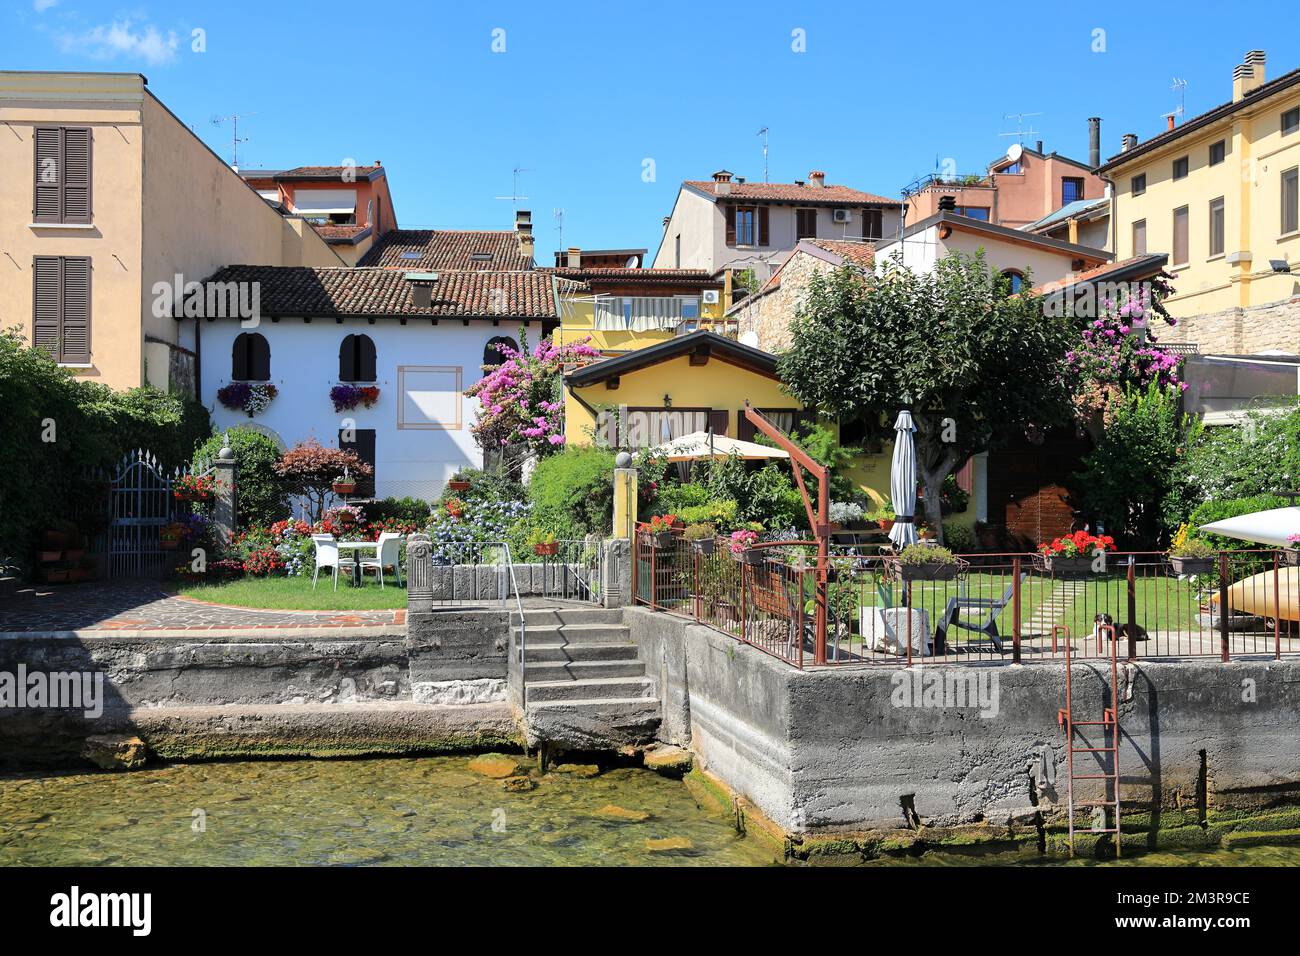 Example of the historic architecture in Salo on Lake Garda. Italy, Europe. Stock Photo